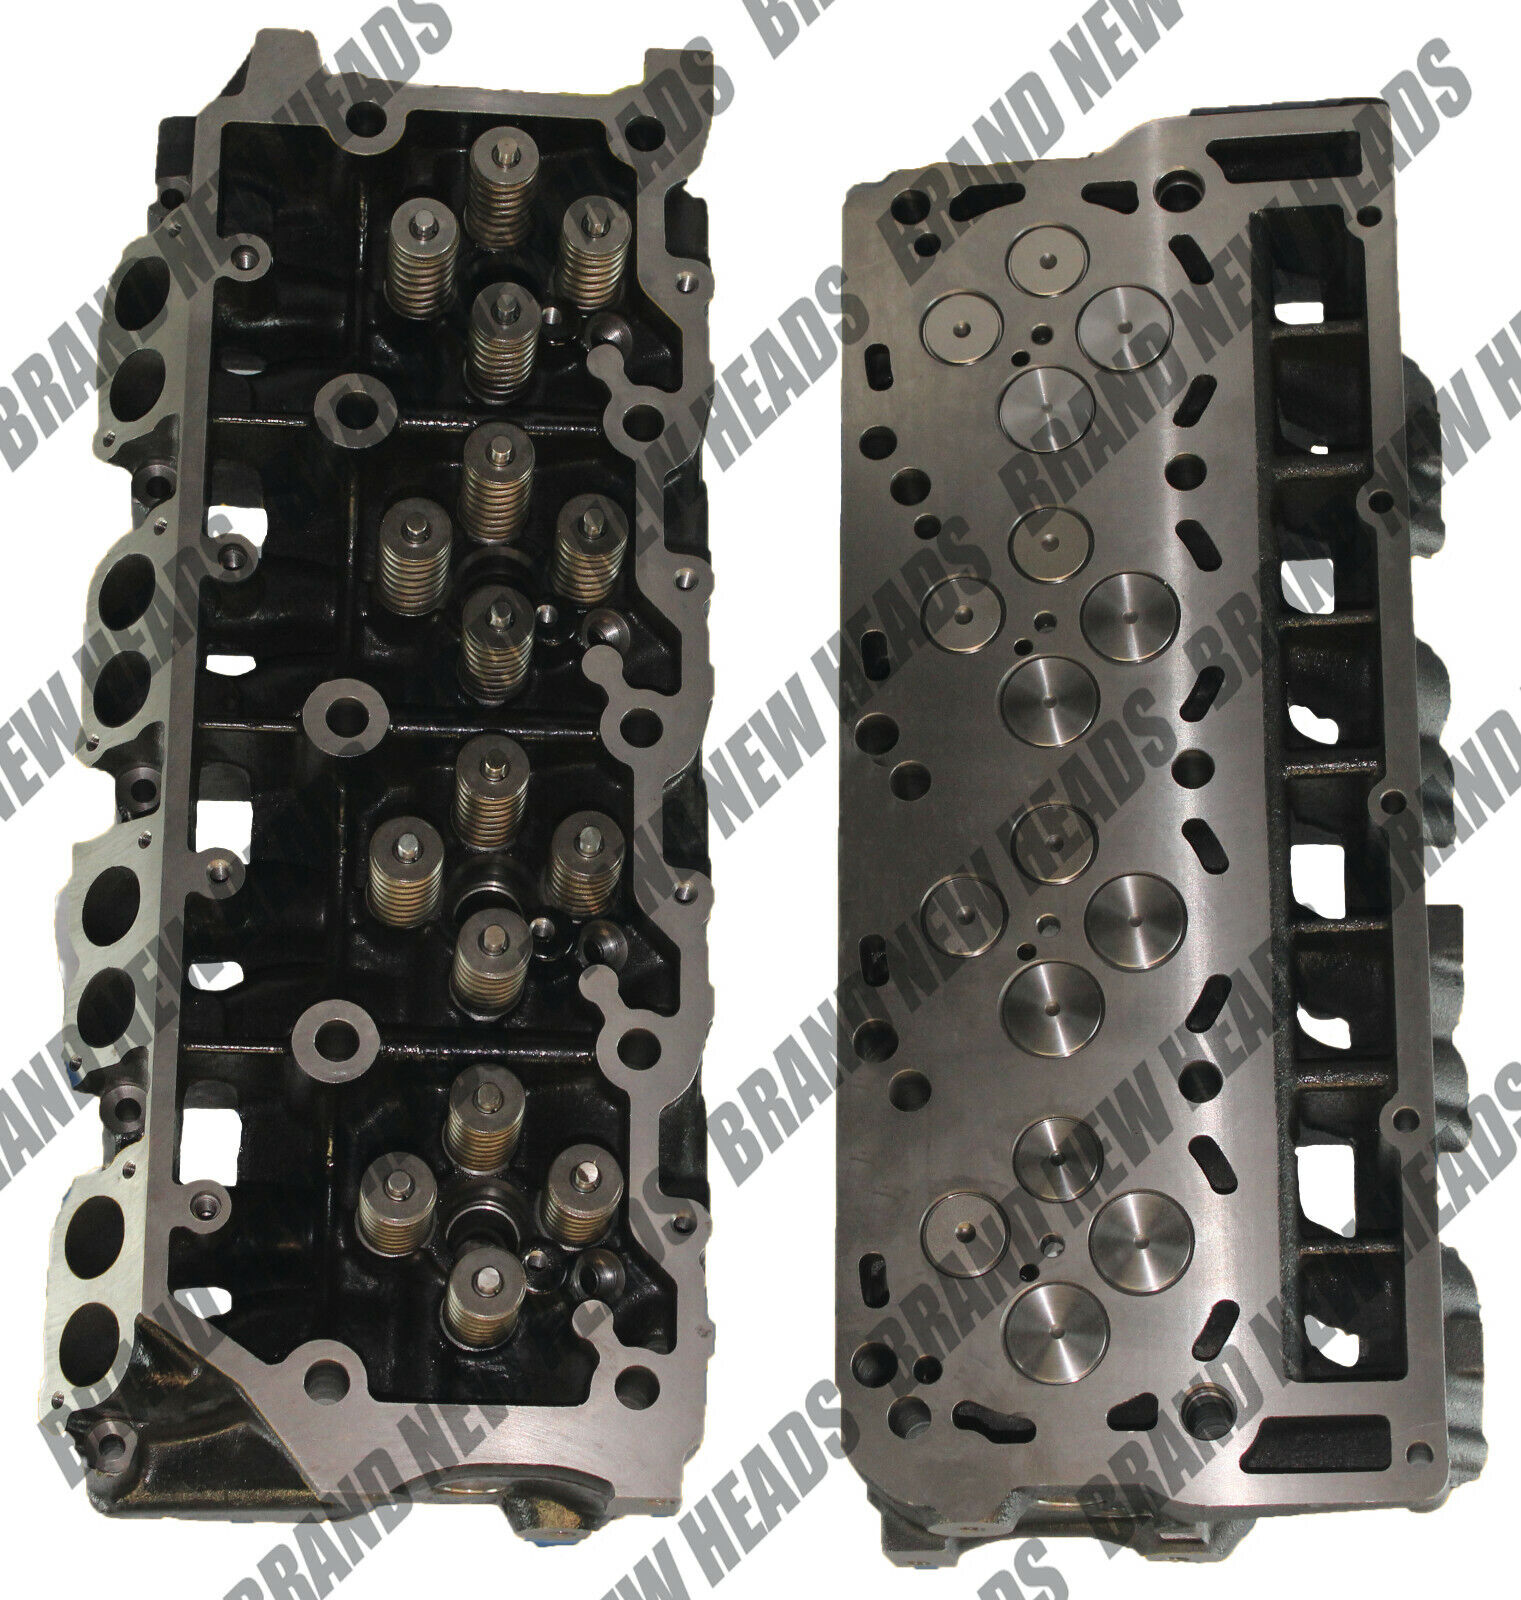 BRAND NEW Ford 6.4L POWERSTROKE F-350 Truck TWIN Turbo V8 Diesel Cylinder Heads